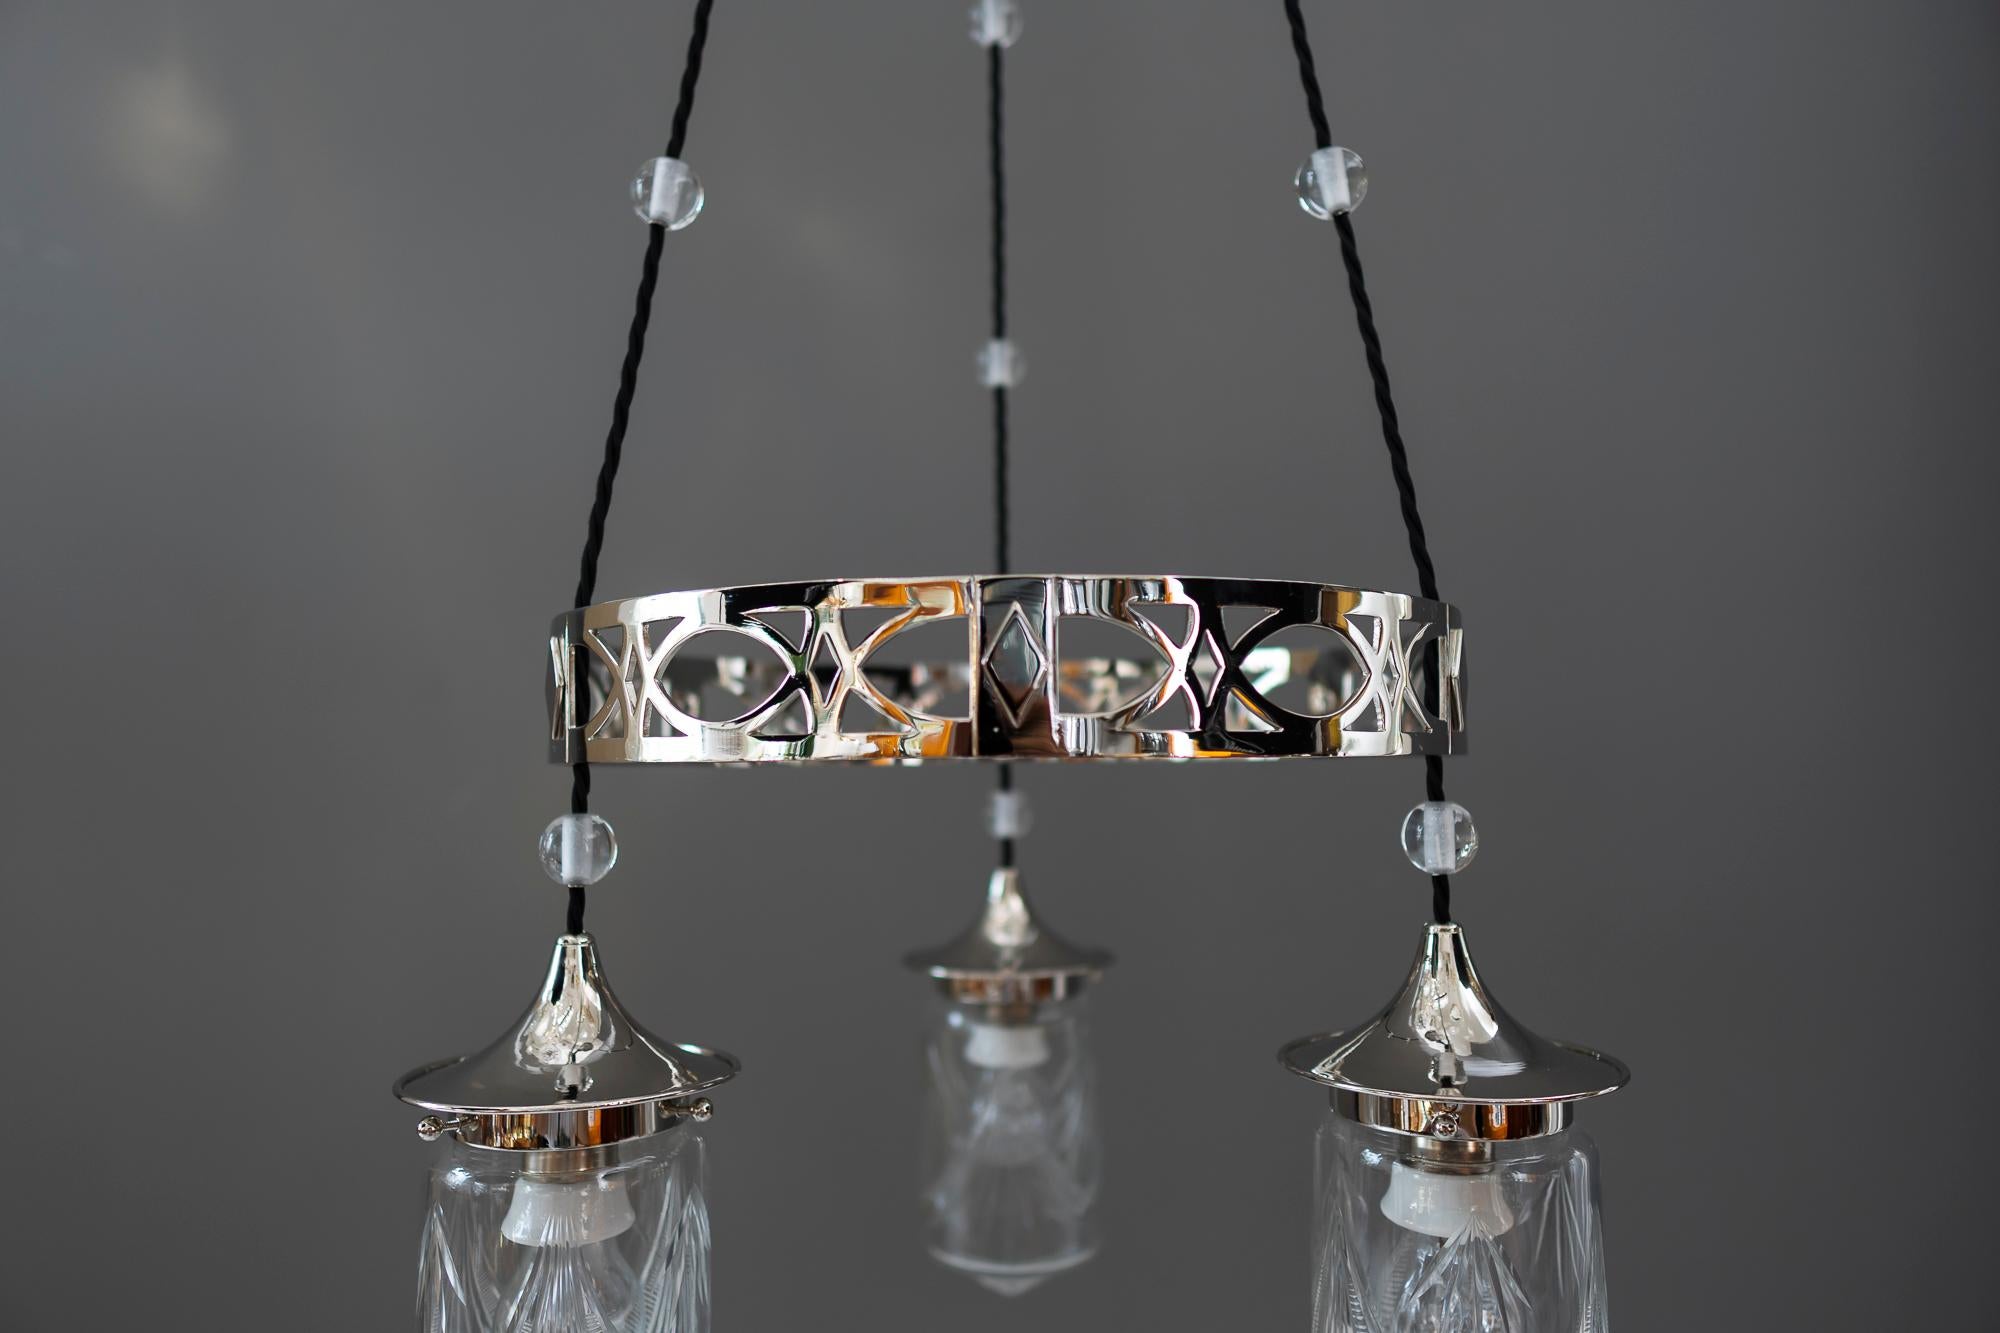 Brass Nickel-Plated Art Deco Chandelier with Original Cut-Glasses, circa 1920s For Sale